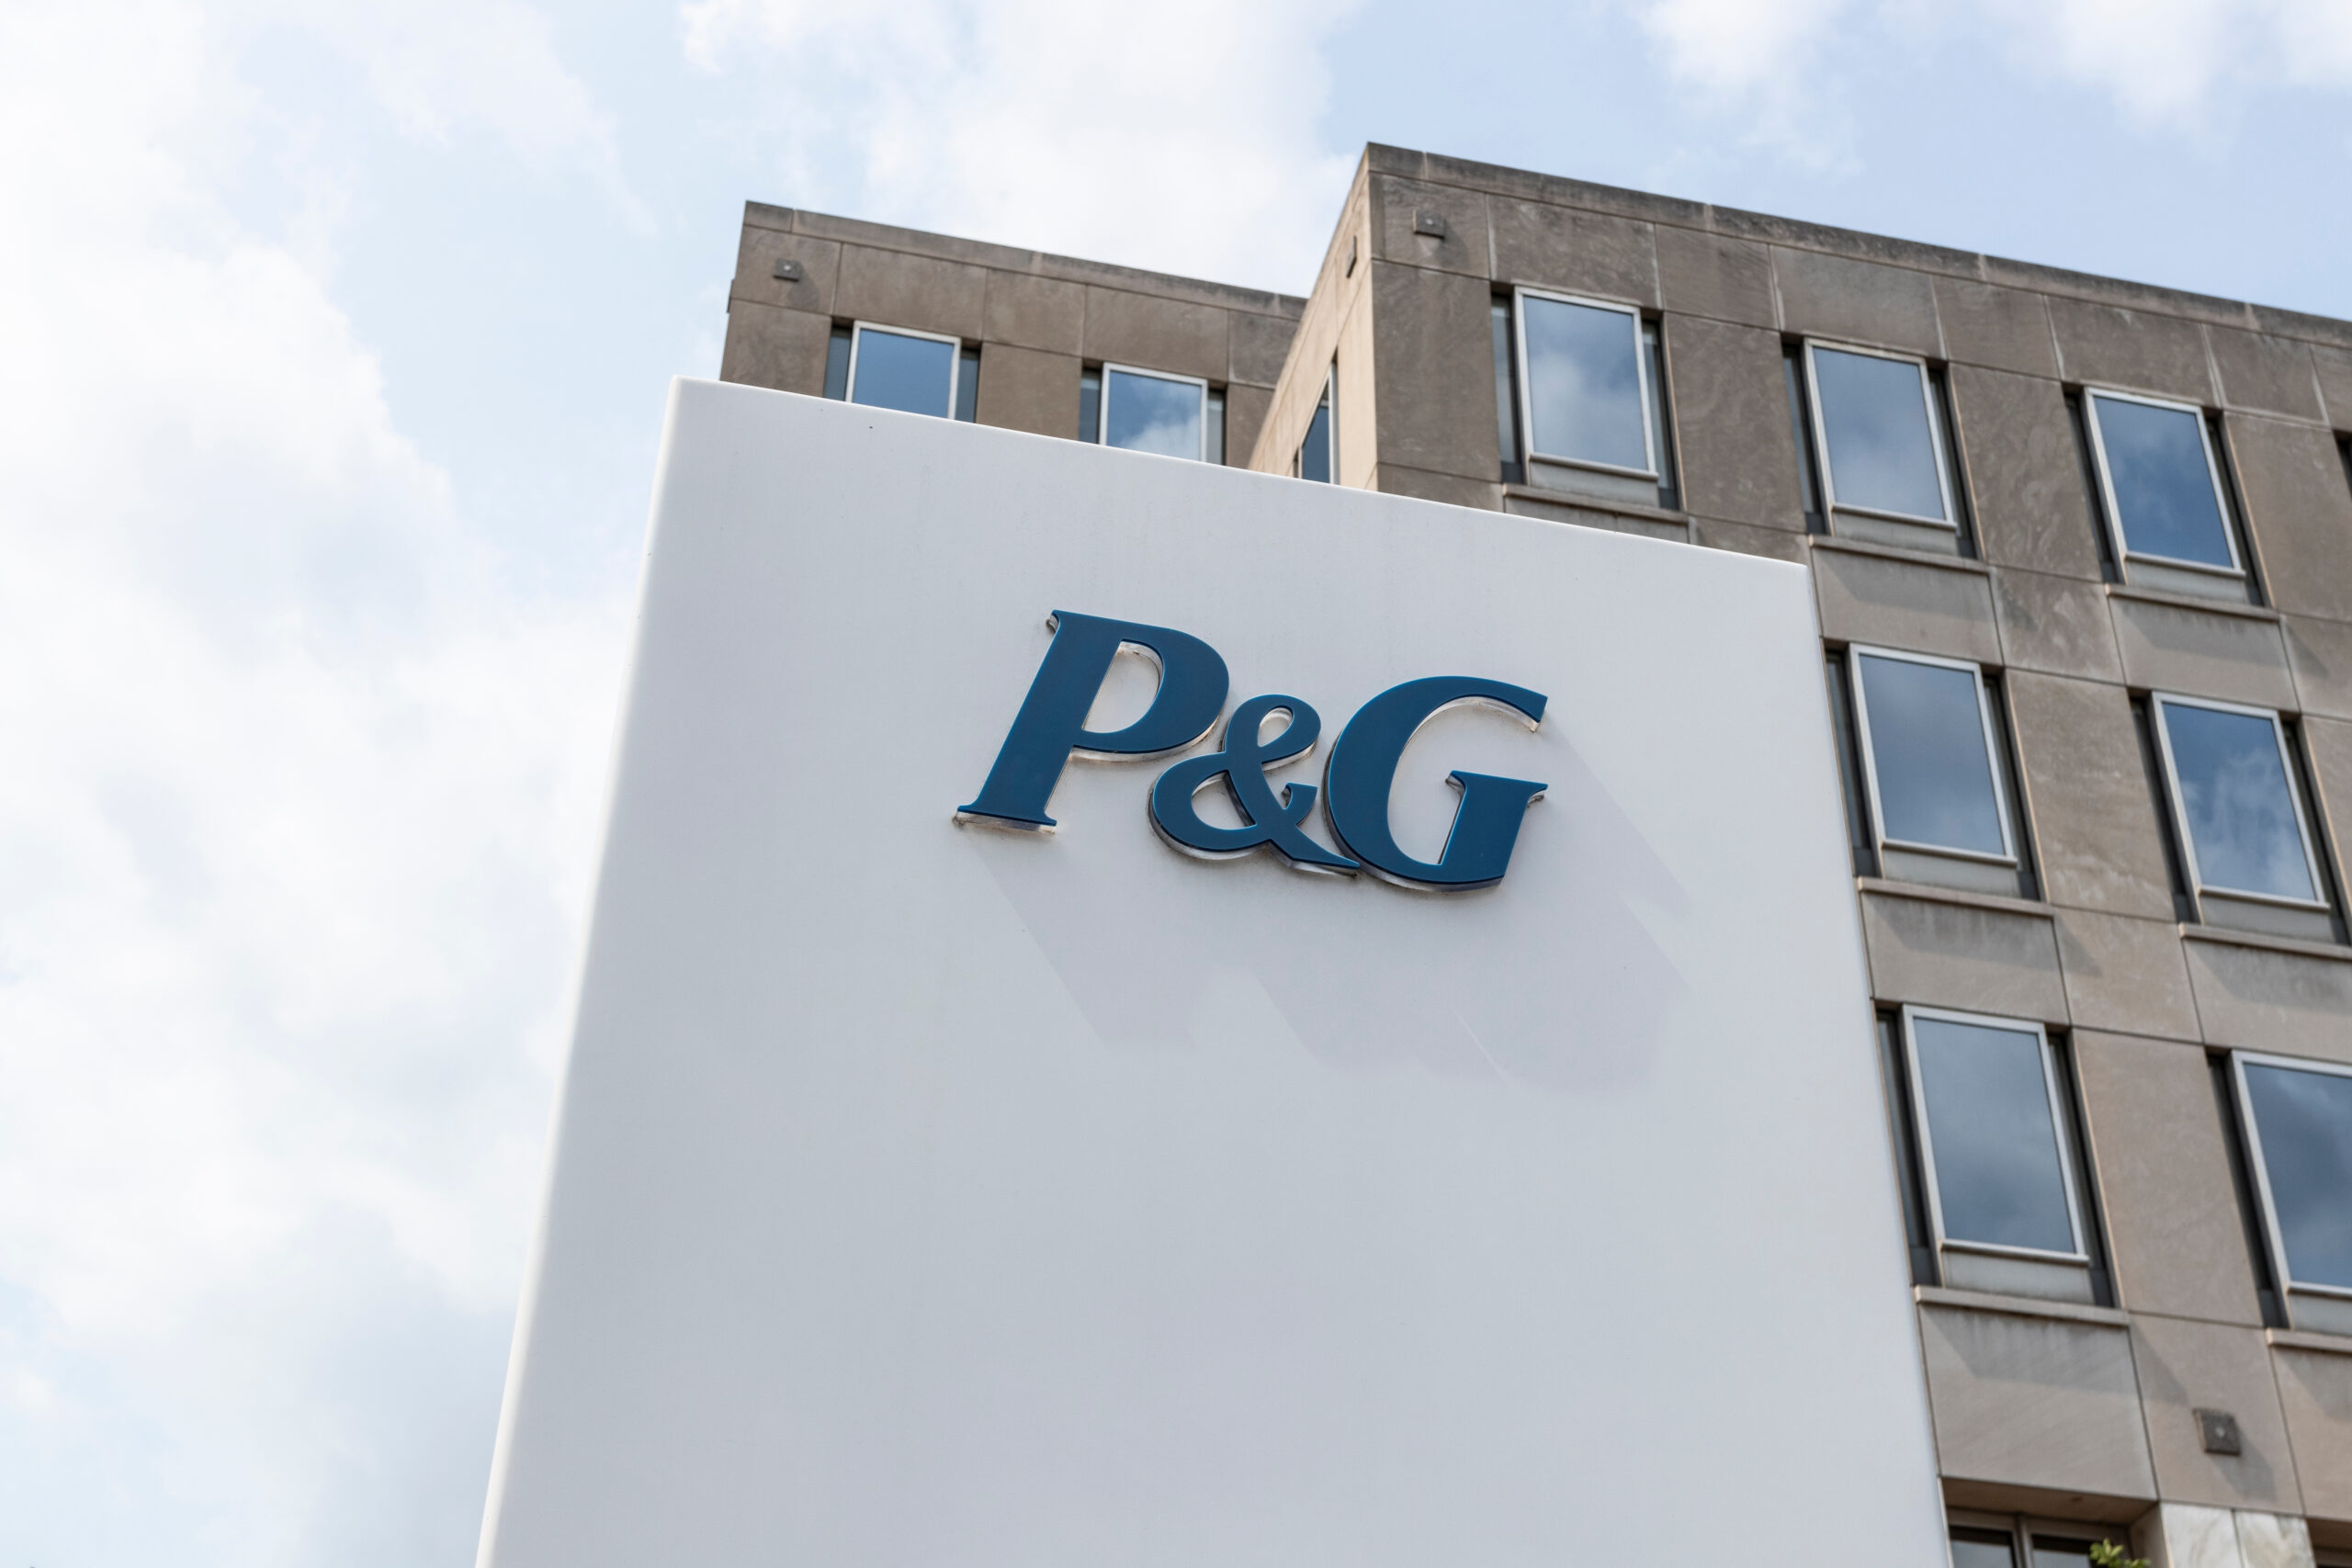 Procter & Gamble Company  Consumer goods, Household products